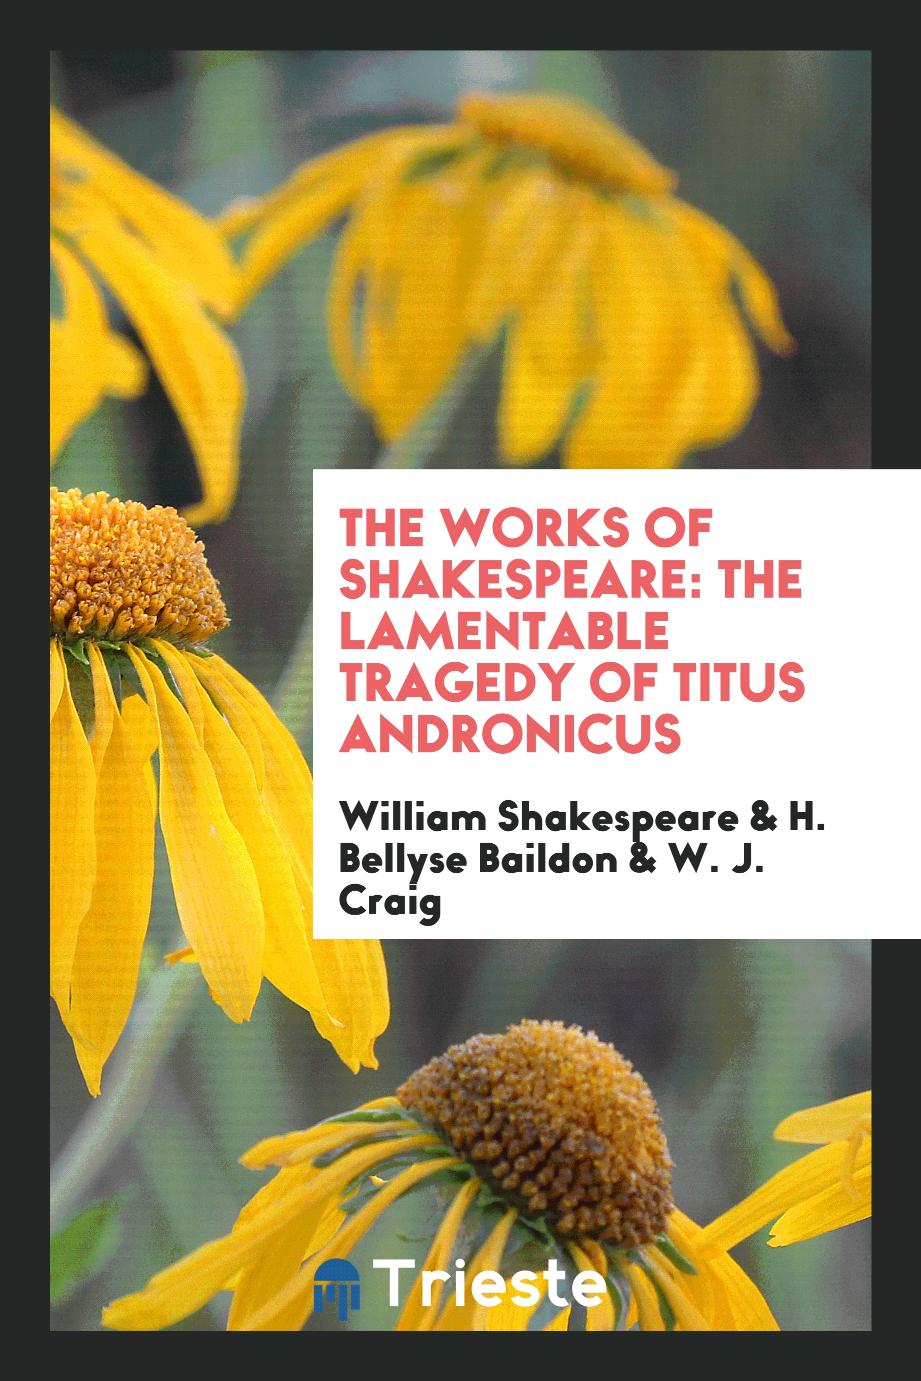 The Works of Shakespeare: The Lamentable Tragedy of Titus Andronicus